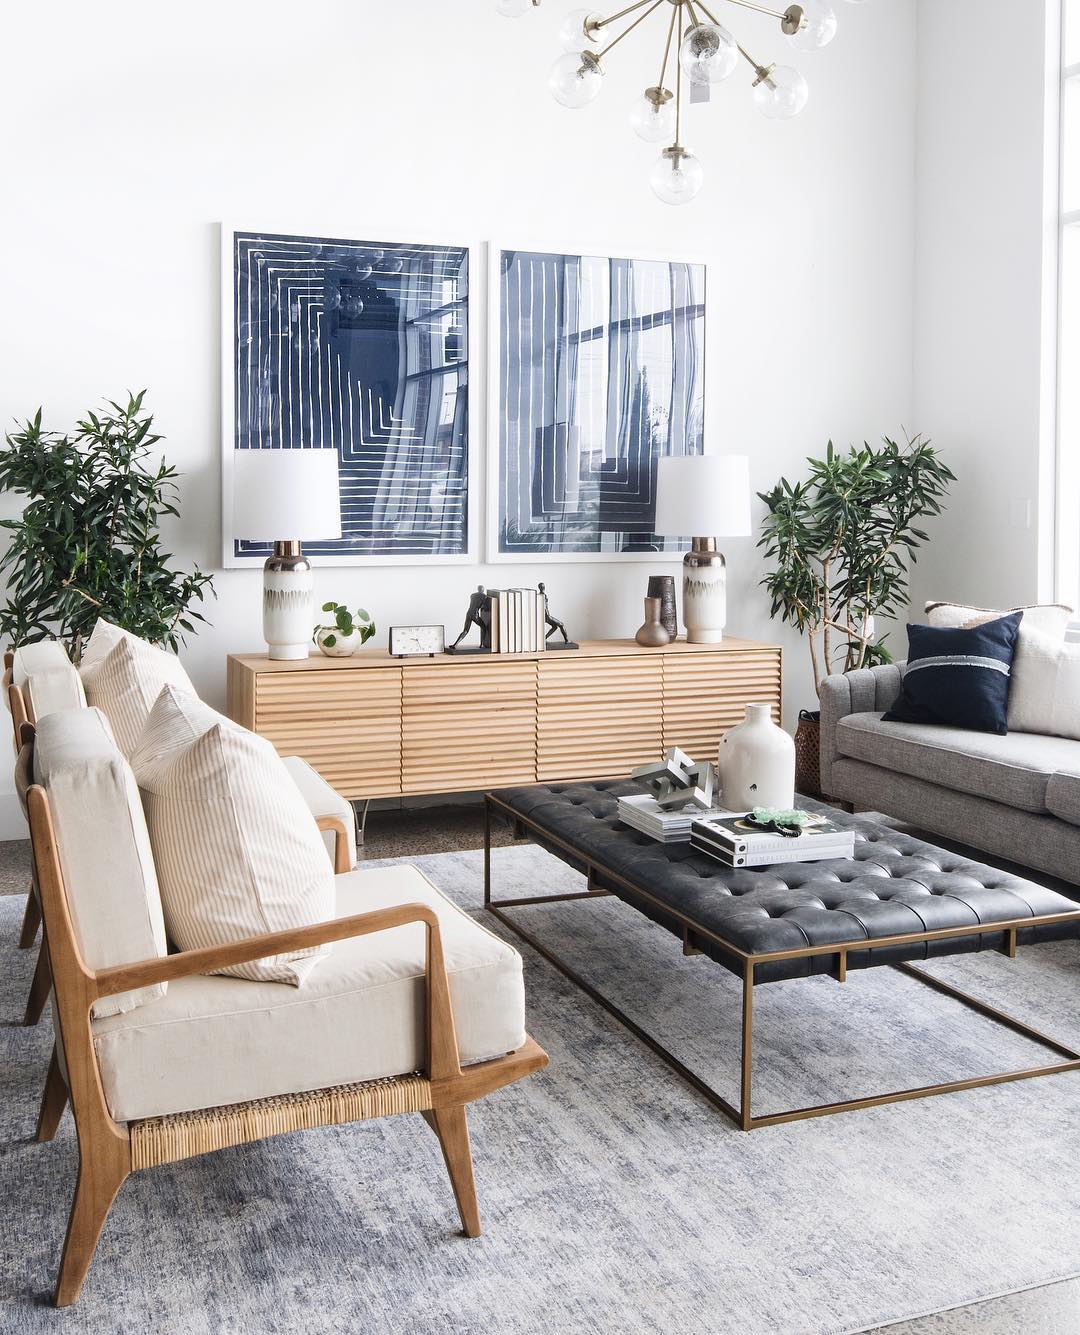 White-painted living room with blue painting on wall and white couches. Photo by Instagram user @leclairdecor